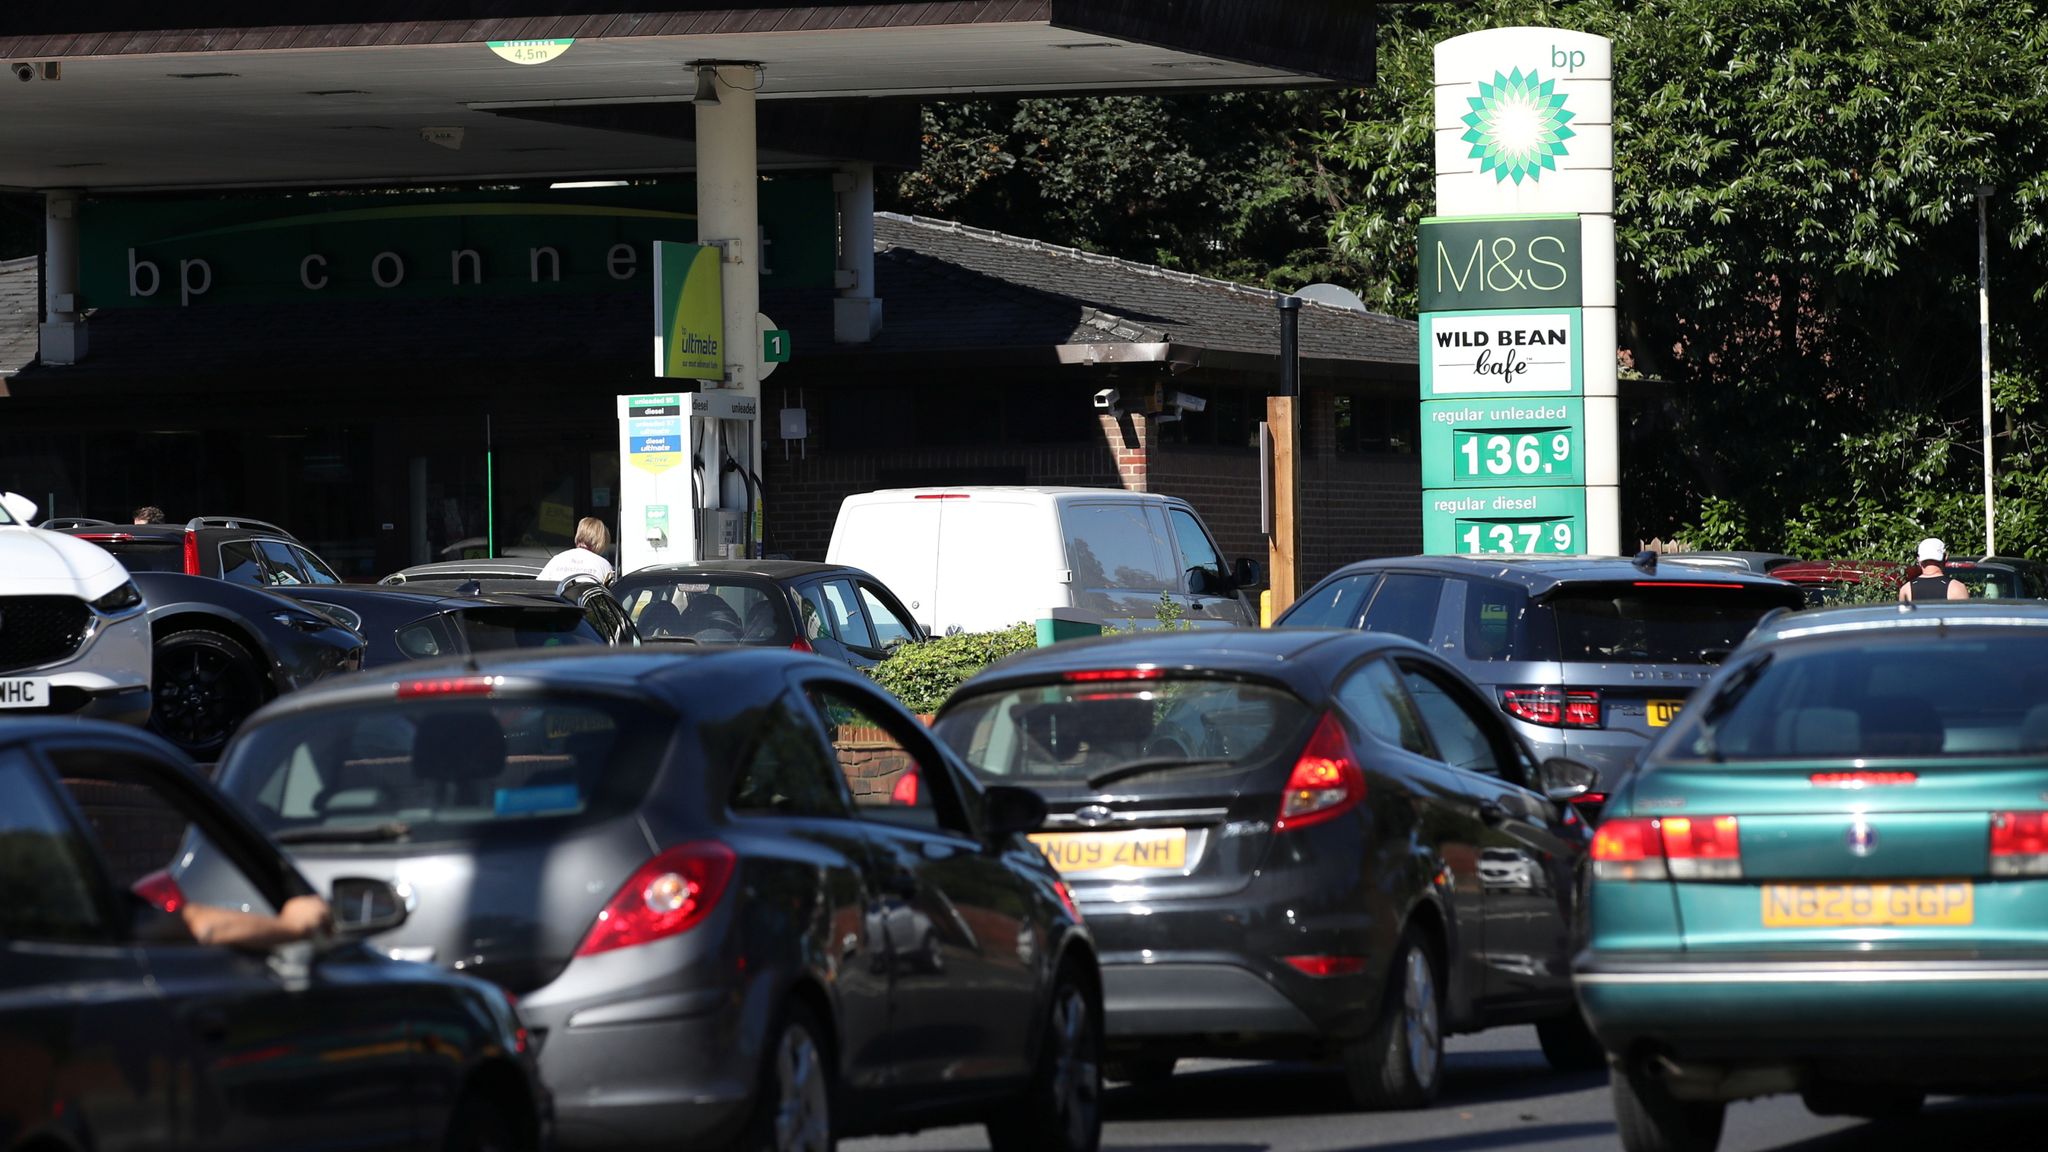 Energy crisis live updates: Almost 400 petrol stations impose £30 limit on fuel due to &#39;unprecedented customer demand&#39; | UK News | Sky News